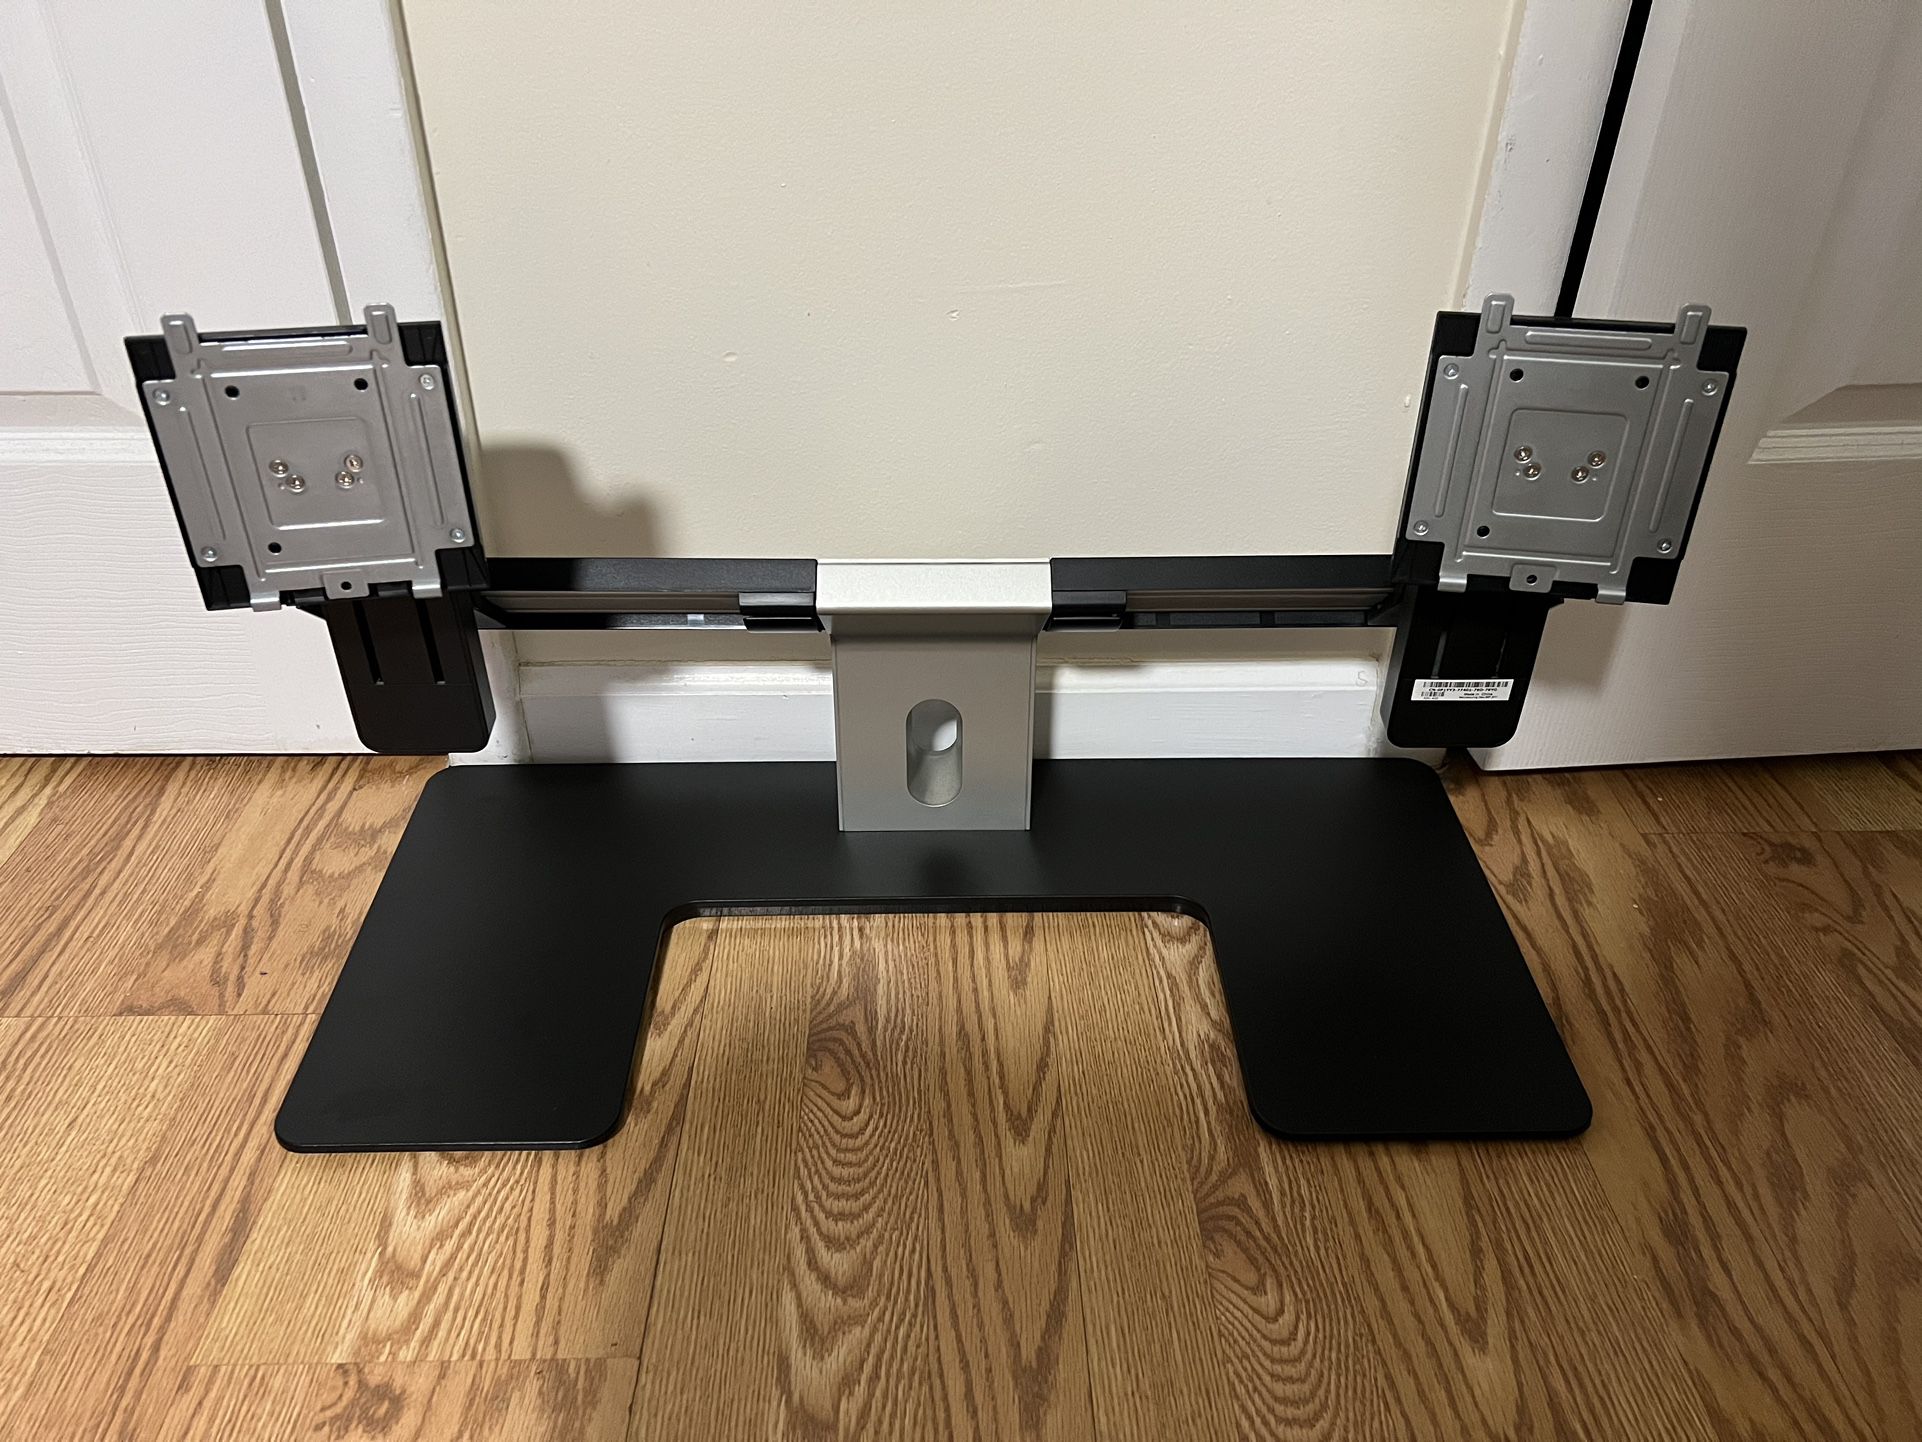 Dell MDS14 Dual Monitor Stand for Sale in Queens, NY - OfferUp